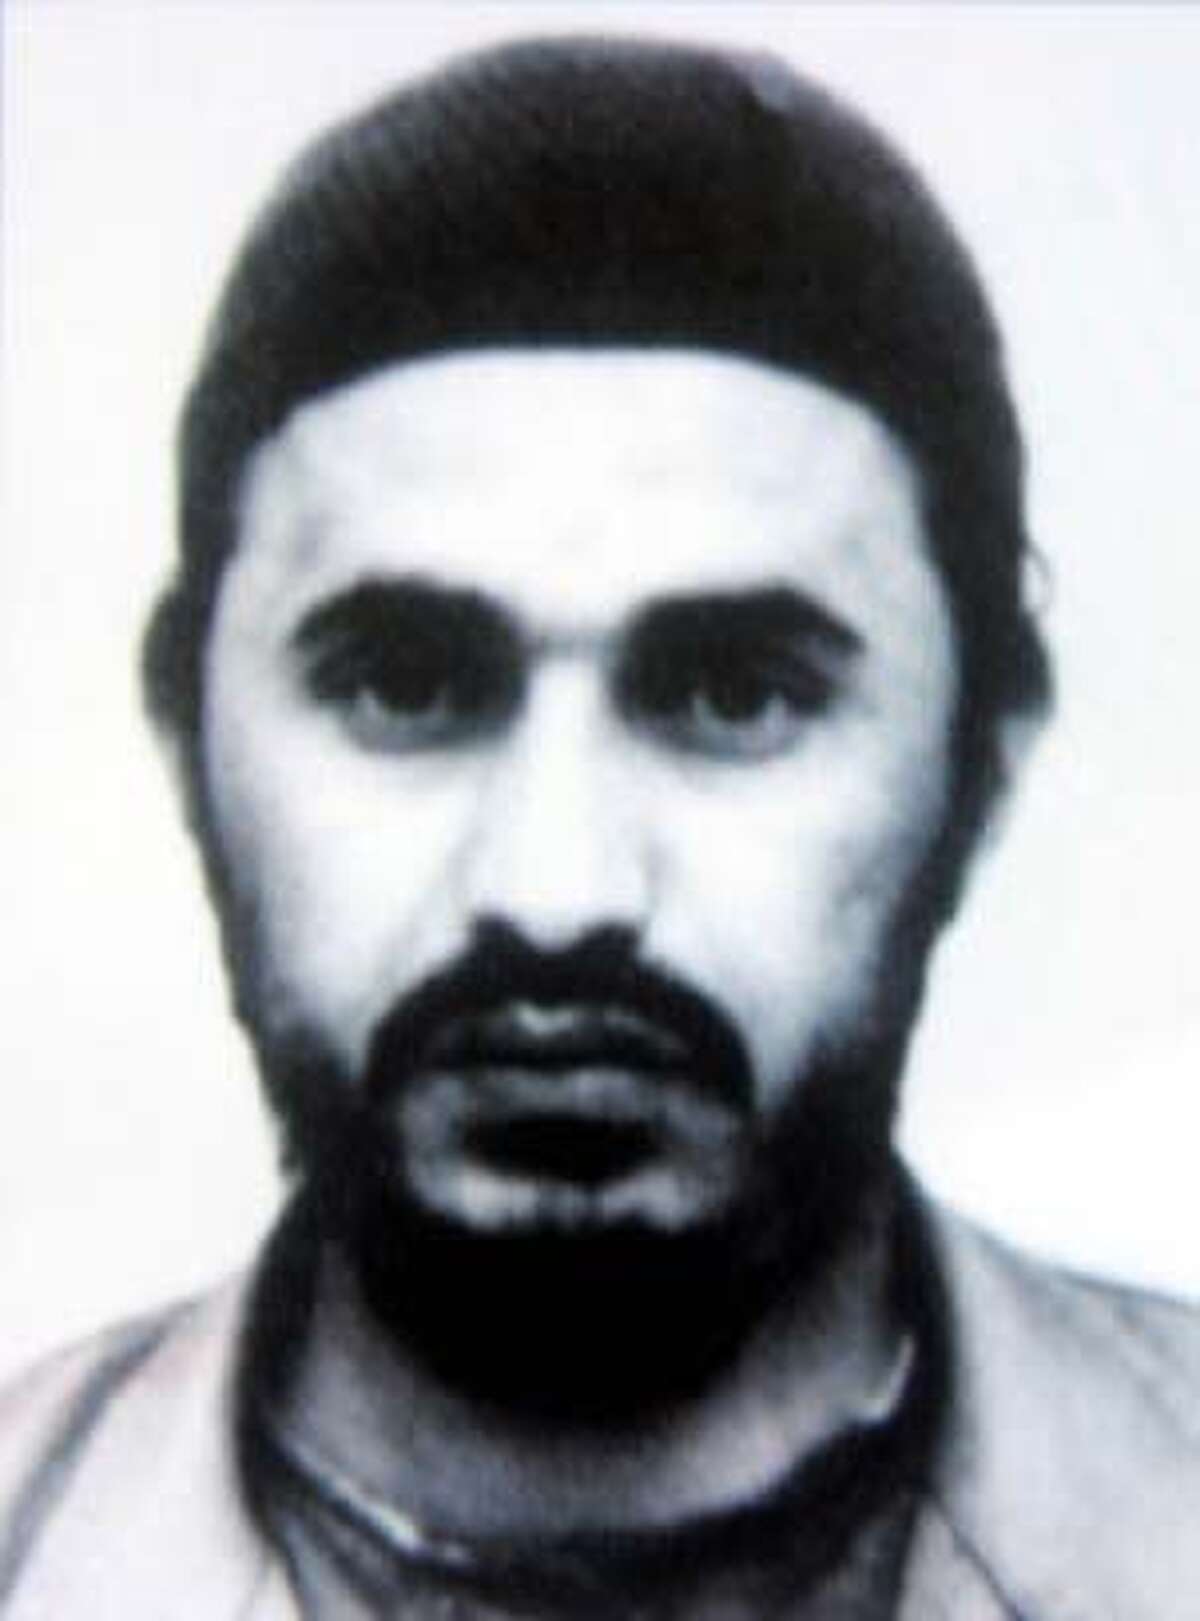 An undated file photograph shows suspected al Qaeda operational leader Abu Musab al-Zarqawi who purportedly beheaded an American civilian in video footage shown on an Islamist Web site May 11, 2004. The Web site said the Jordanian-born Abu Musab al-Zarqawi, 37, a top ally of al Qaeda leader Osama bin Laden, was the man who cut off the Americans head in the video footage shown on Tuesday. The statement in the video was signed off with Zarqawi's name and dated May 11. REUTERS/Petra/File photo B/W ONLY BEST QUALITY AVAILABLE